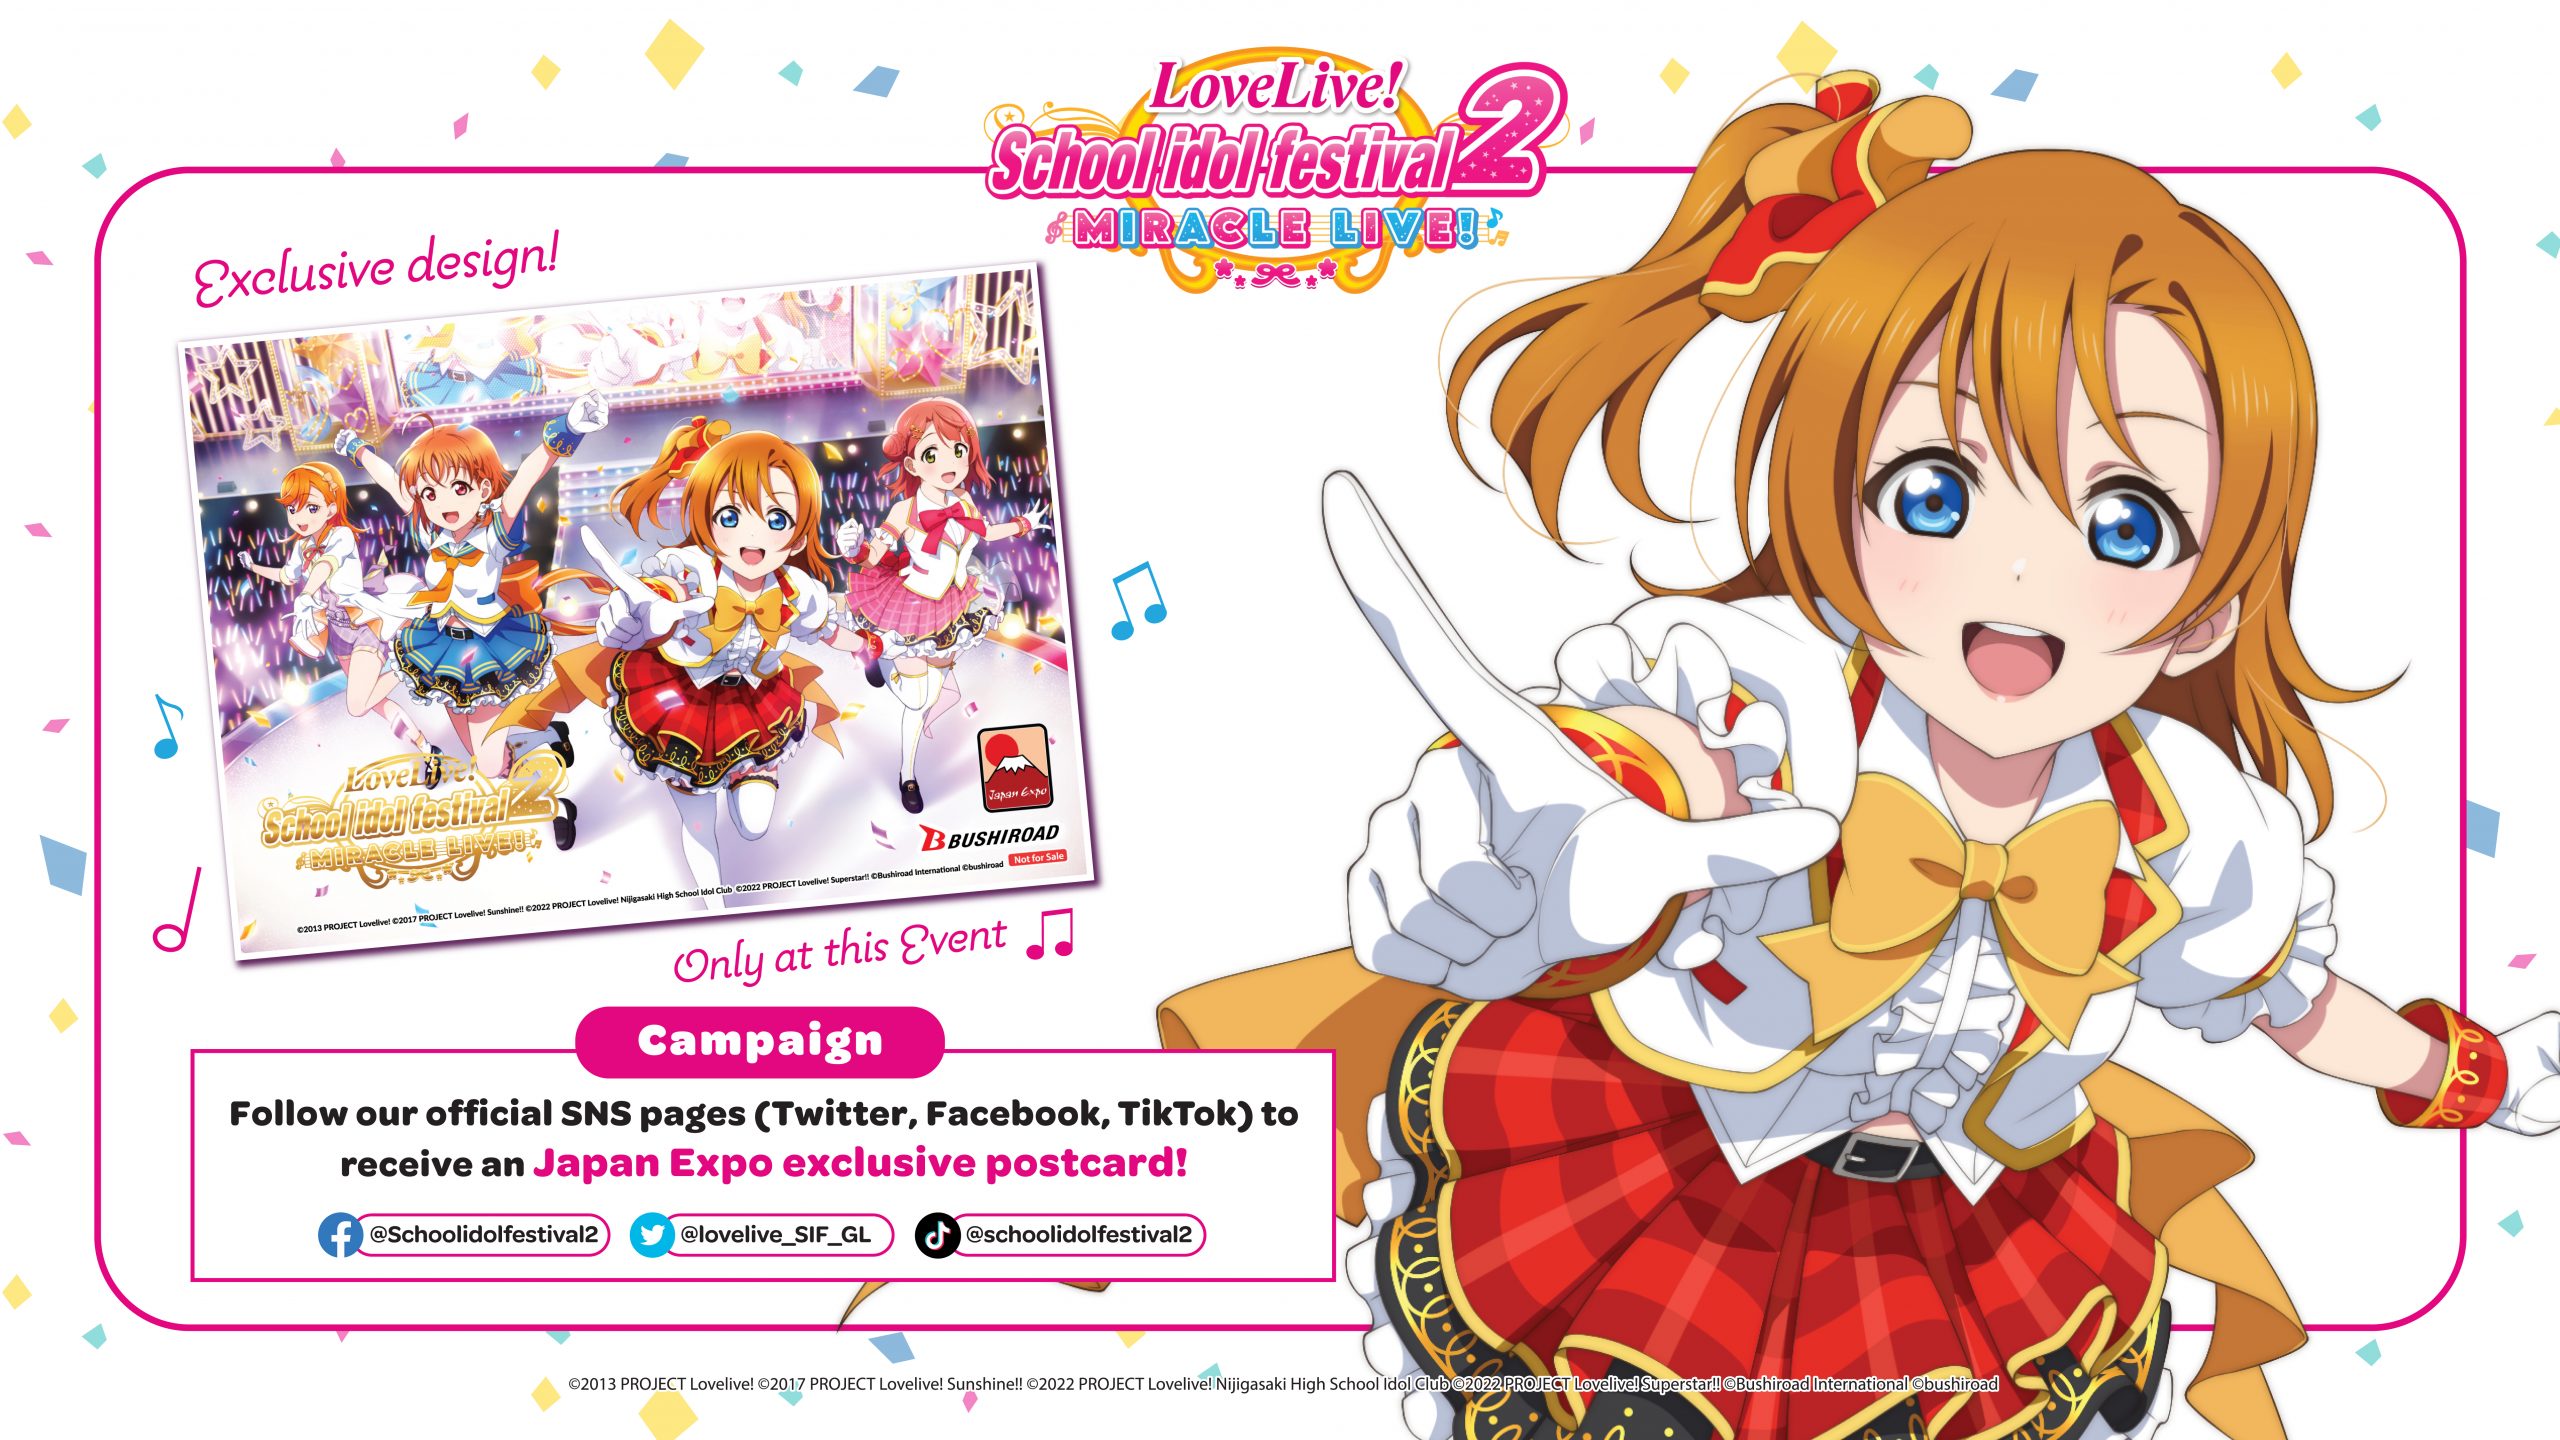 Love Live! School idol festival 2 MIRACLE LIVE! (@lovelive_SIF_GL) / X